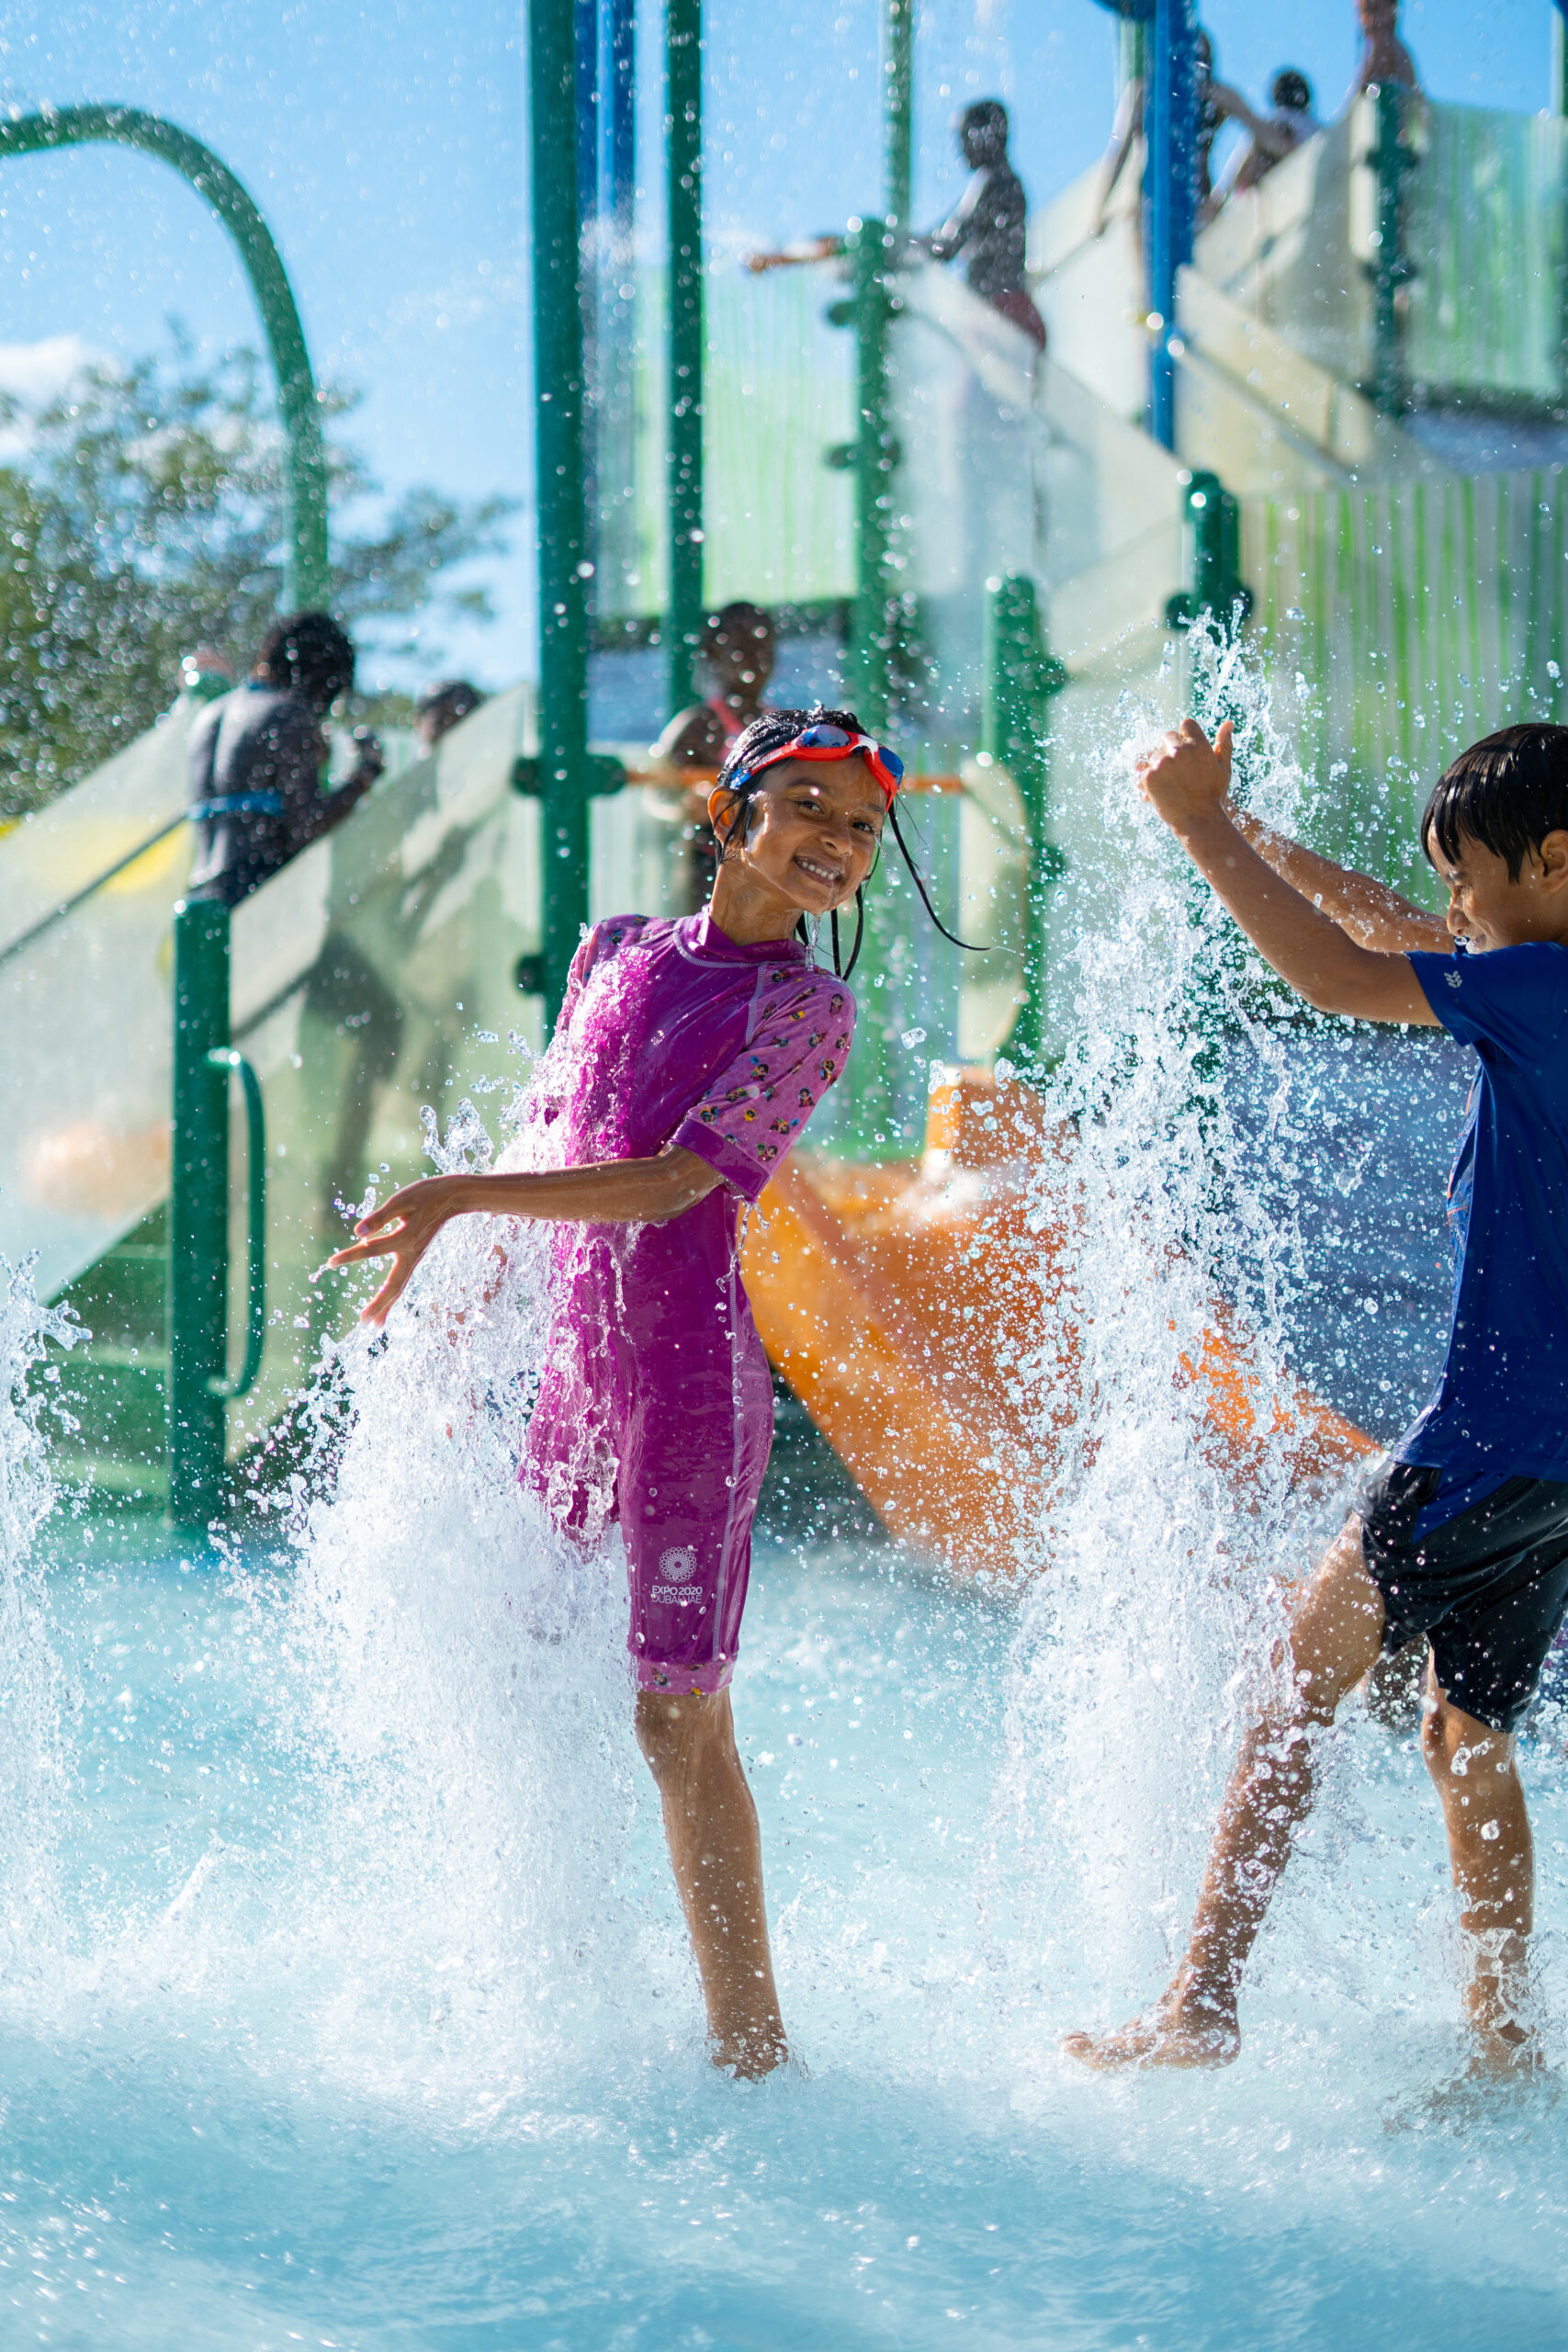 Children smile at the camera and splash in an upward spray feature in the activity pool at The Waterpark.